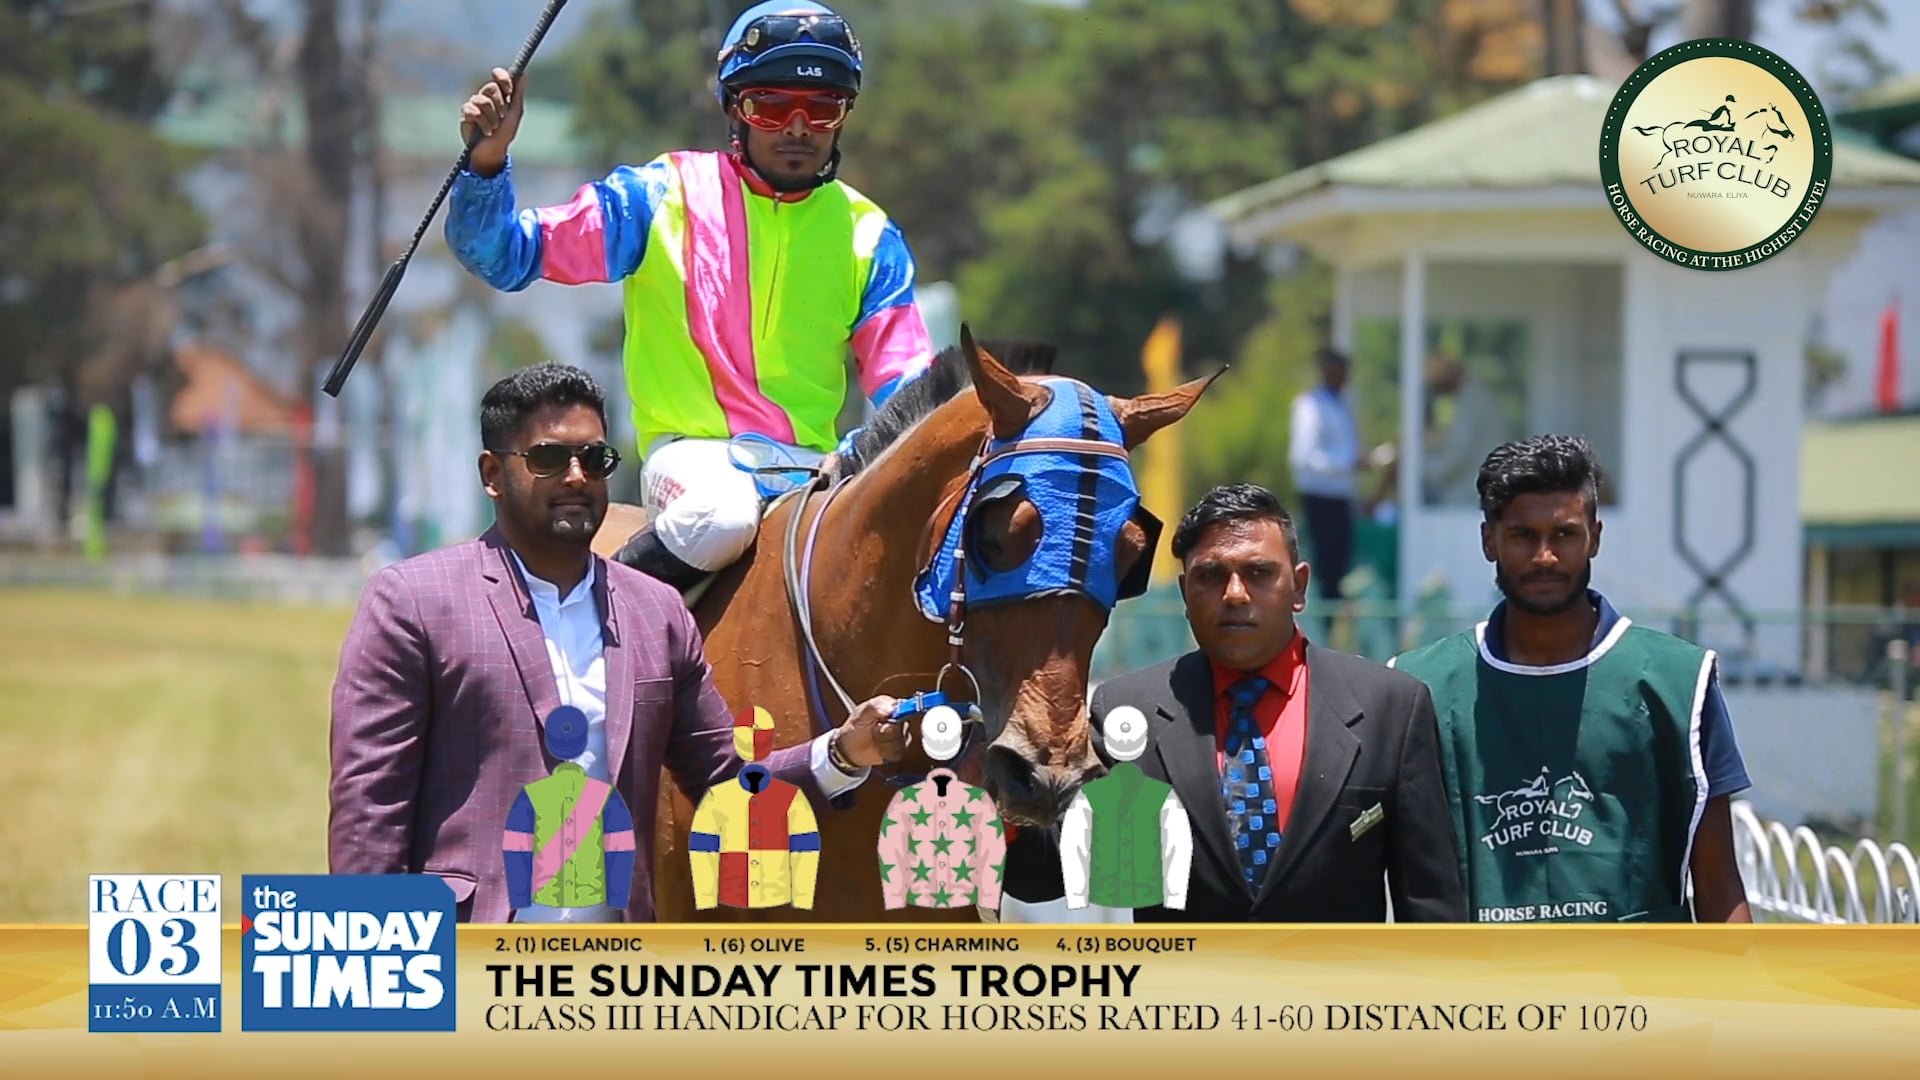 The Sunday Times Trophy